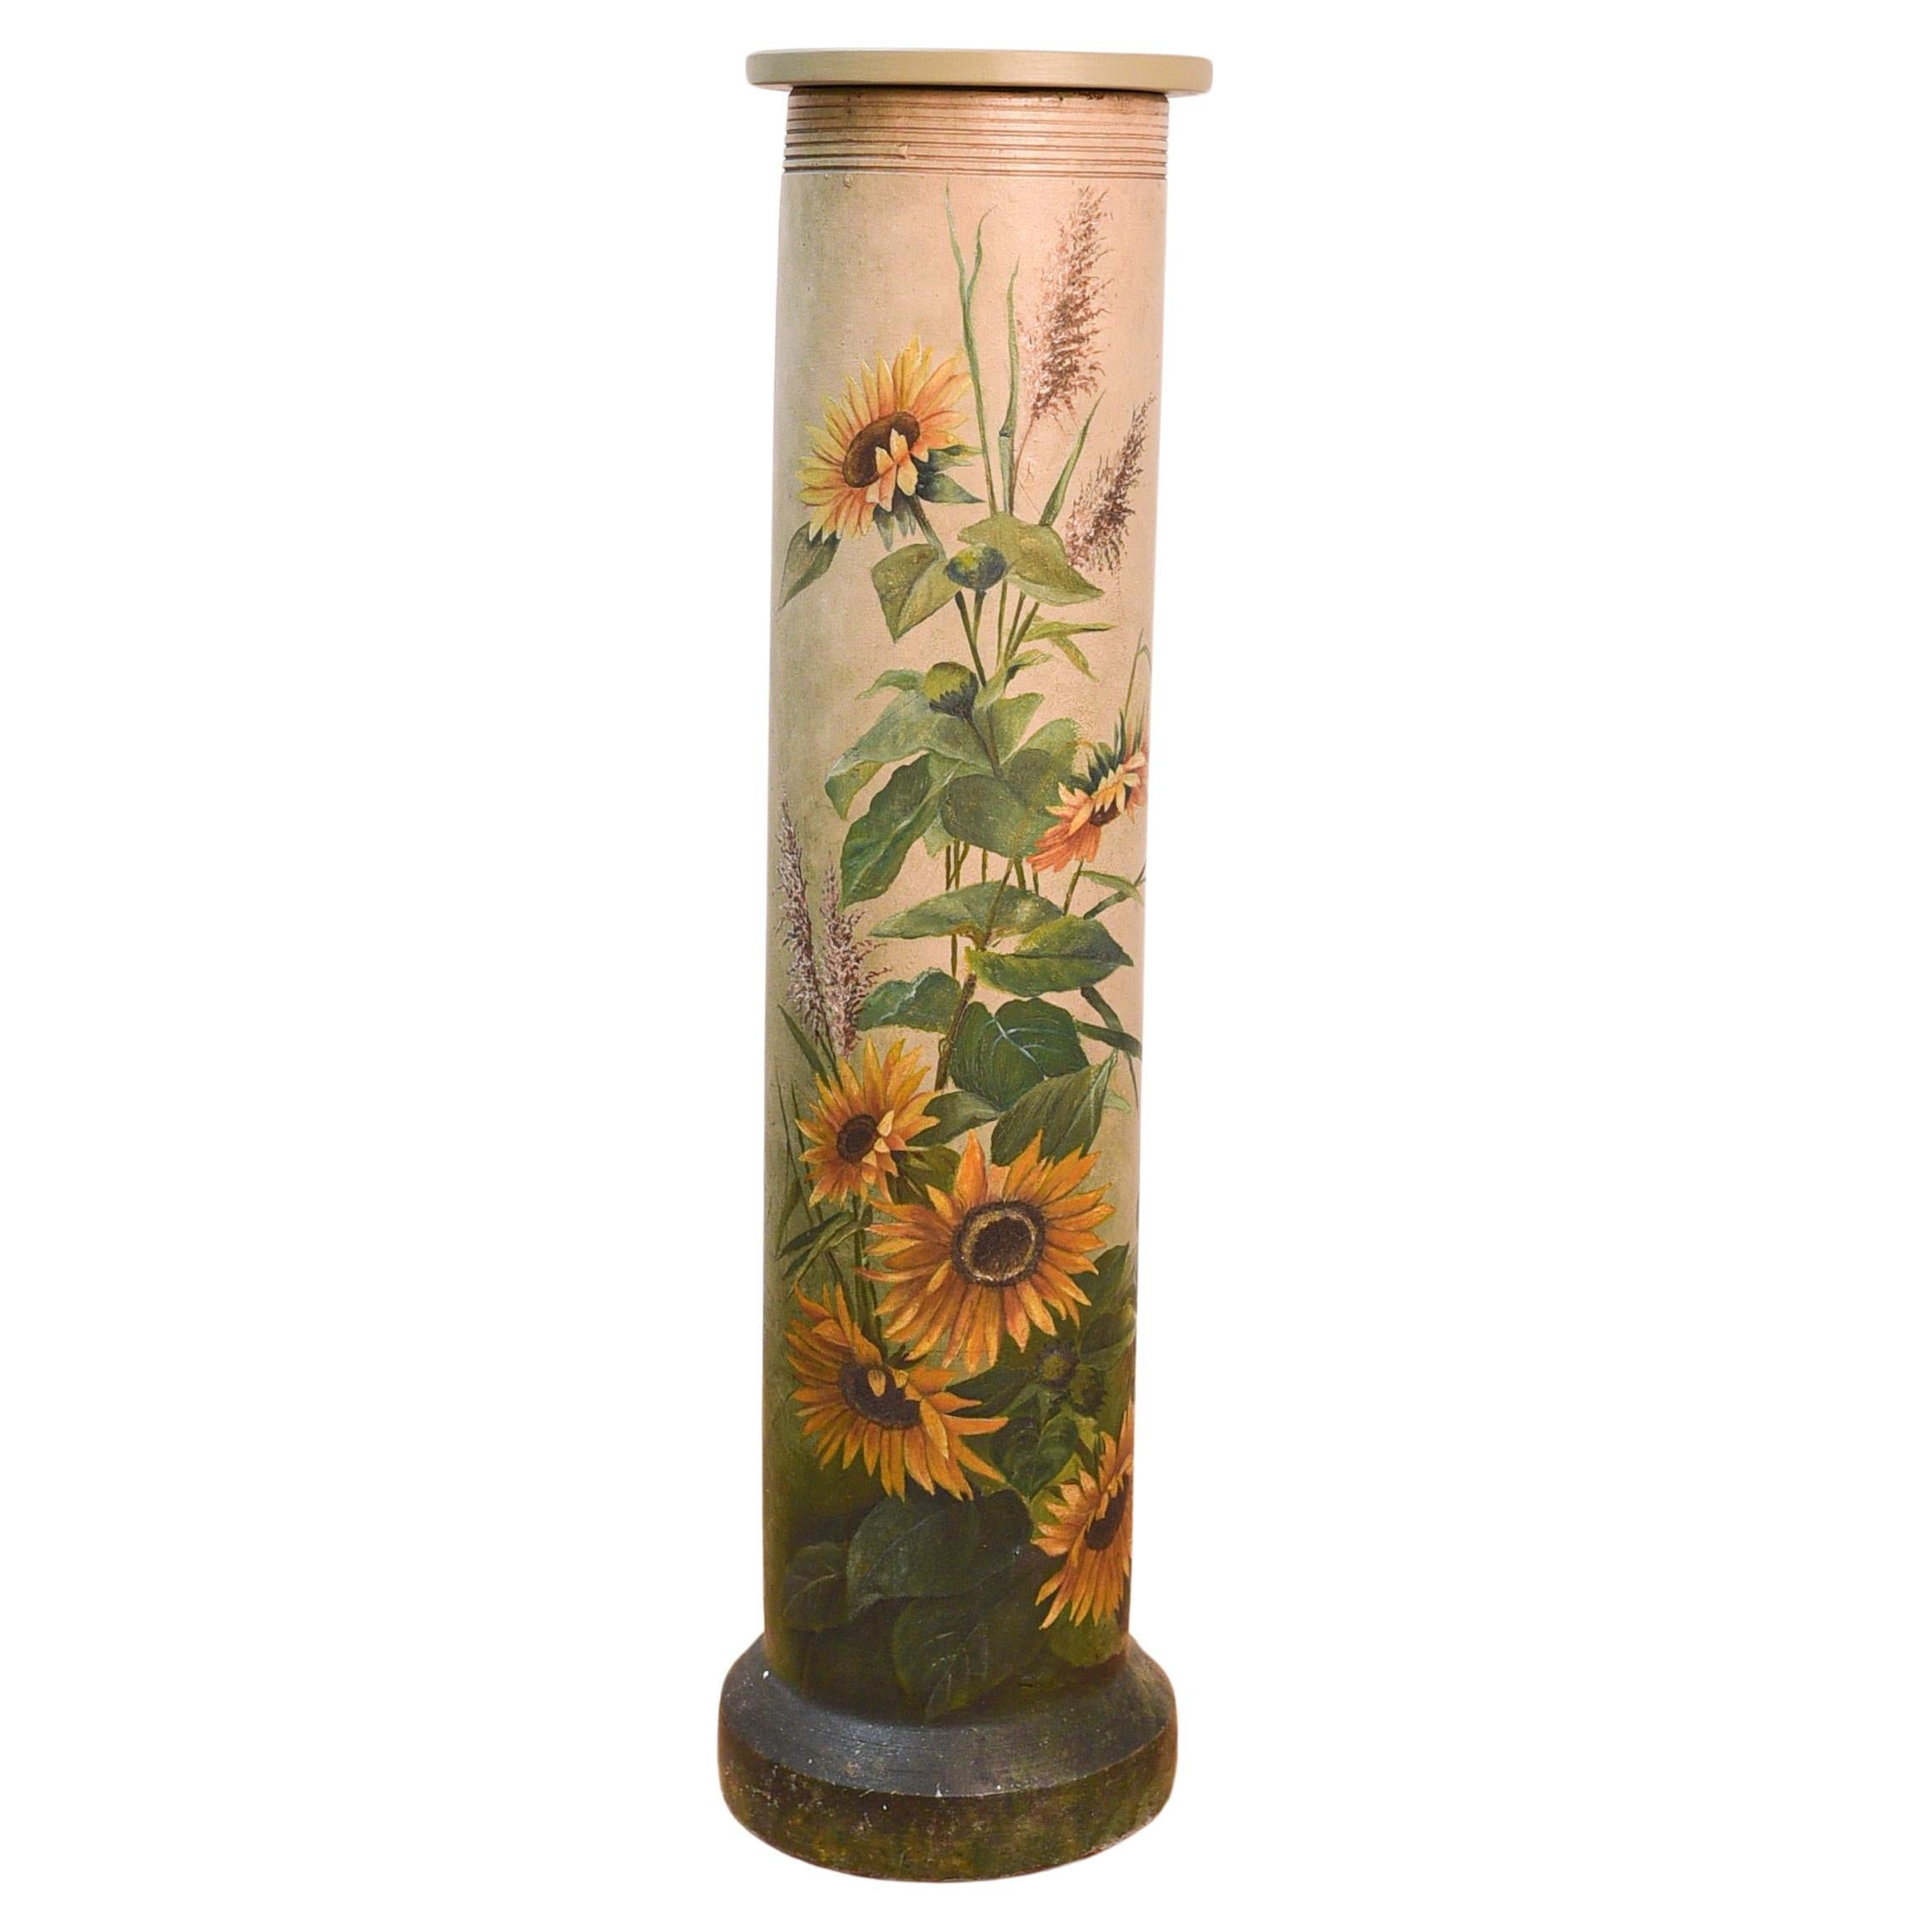 Unique 19th century hand-painted French terra cotta column For Sale